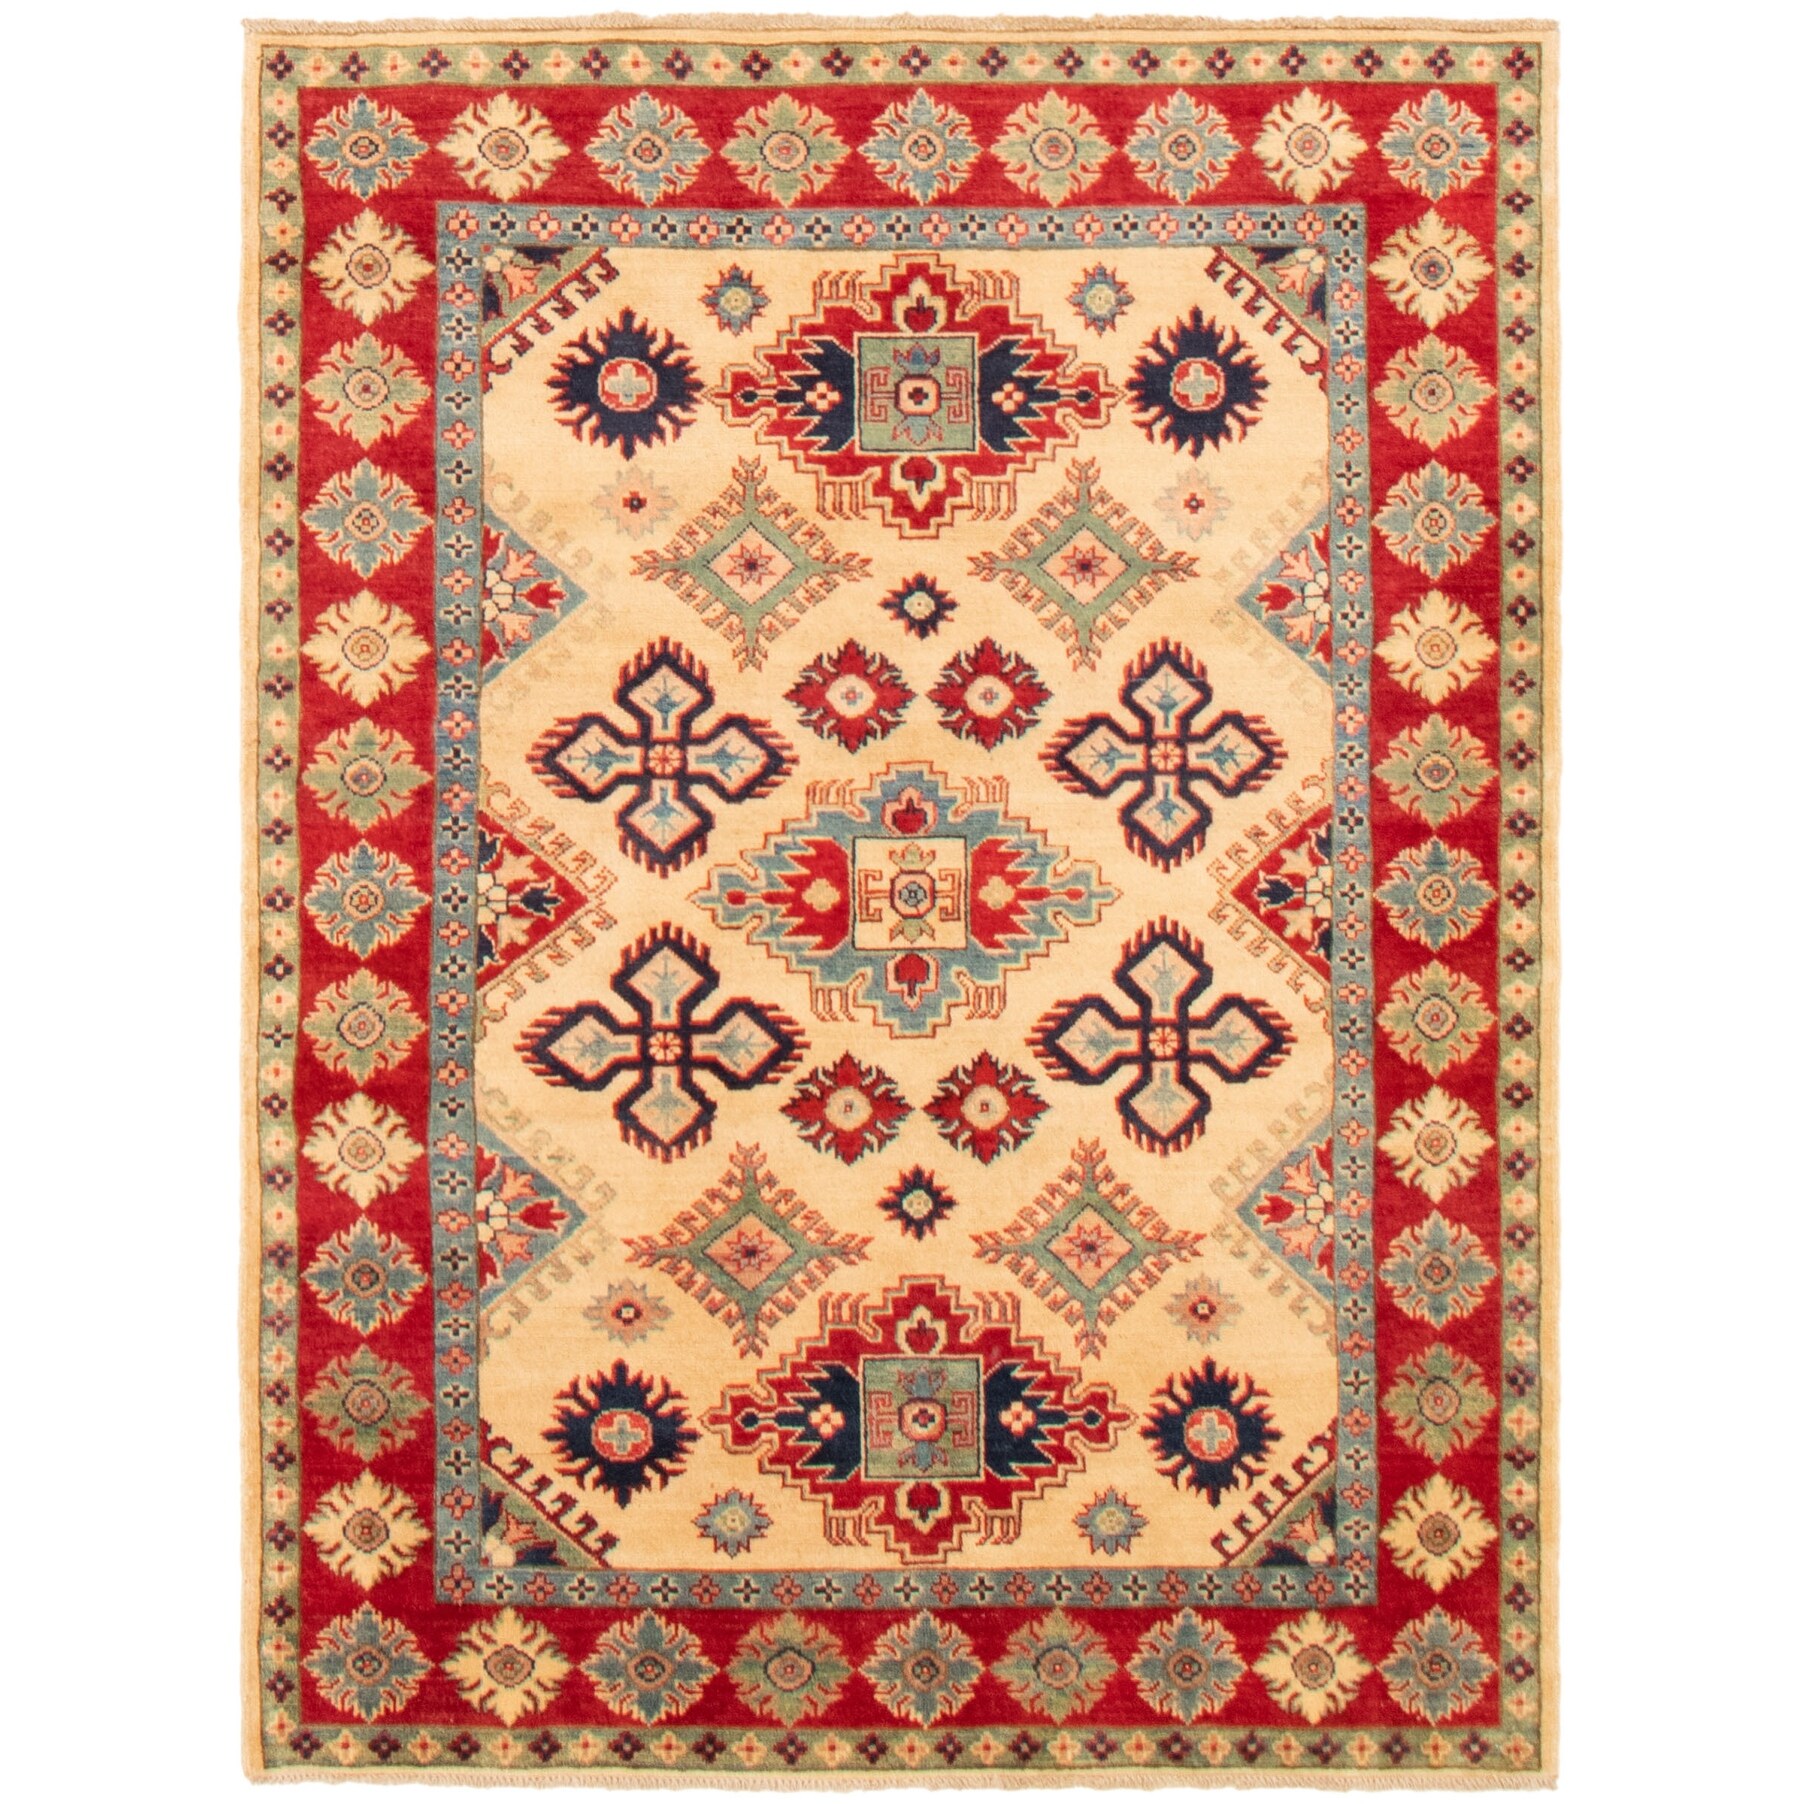 Chobi Finest Bordered Ivory Rug 4'9 x 6'7 Bedroom Hand-Knotted Wool Rug eCarpet Gallery Area Rug for Living Room 331621 